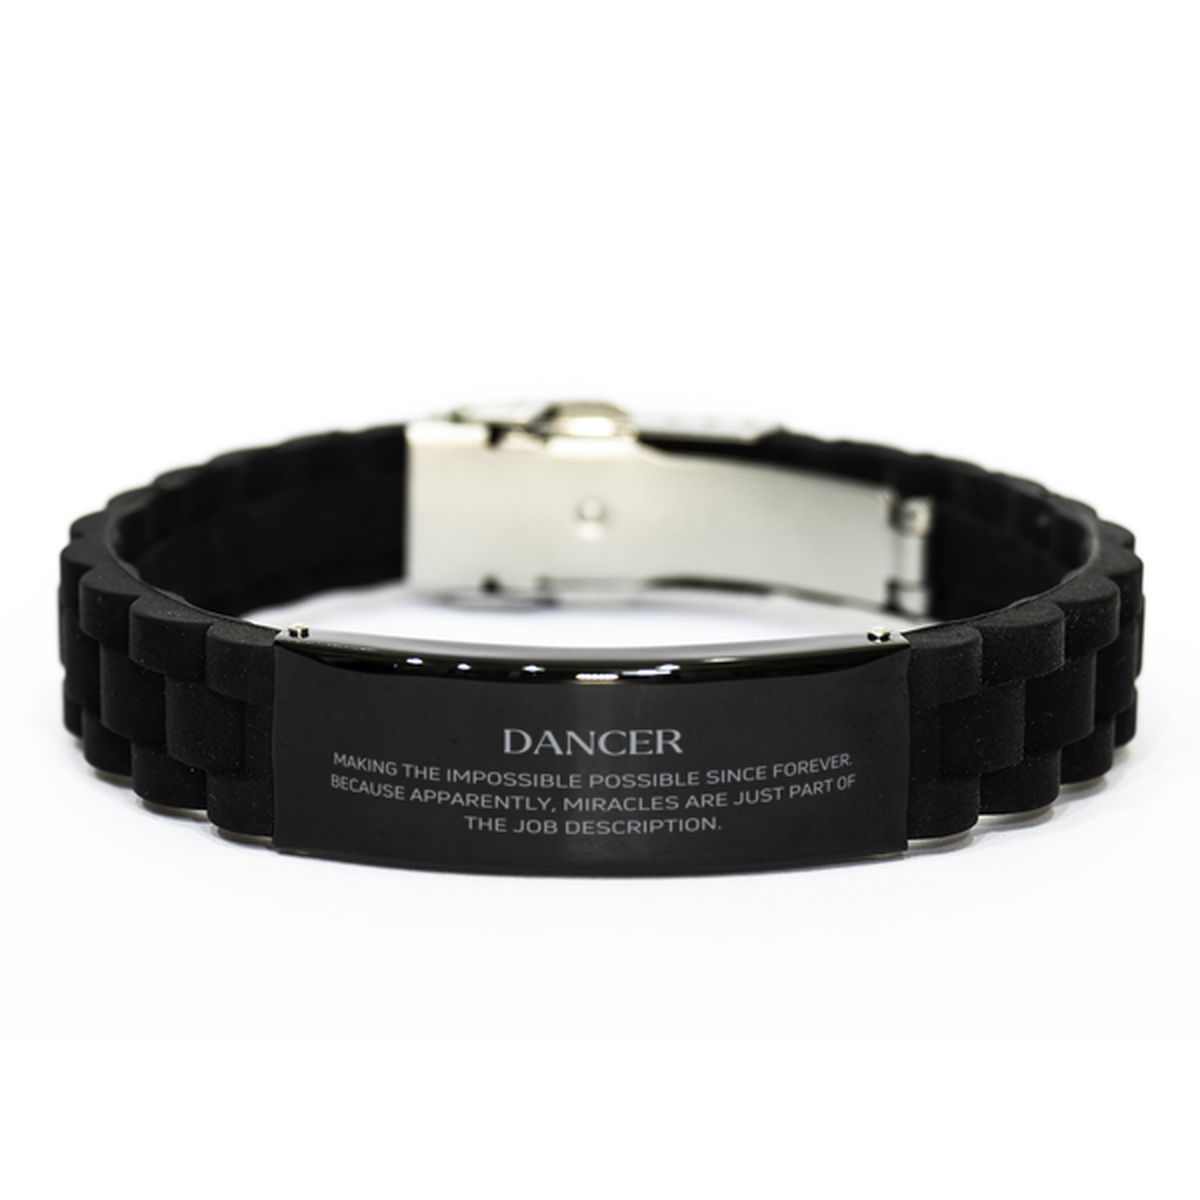 Funny Dancer Gifts, Miracles are just part of the job description, Inspirational Birthday Black Glidelock Clasp Bracelet For Dancer, Men, Women, Coworkers, Friends, Boss